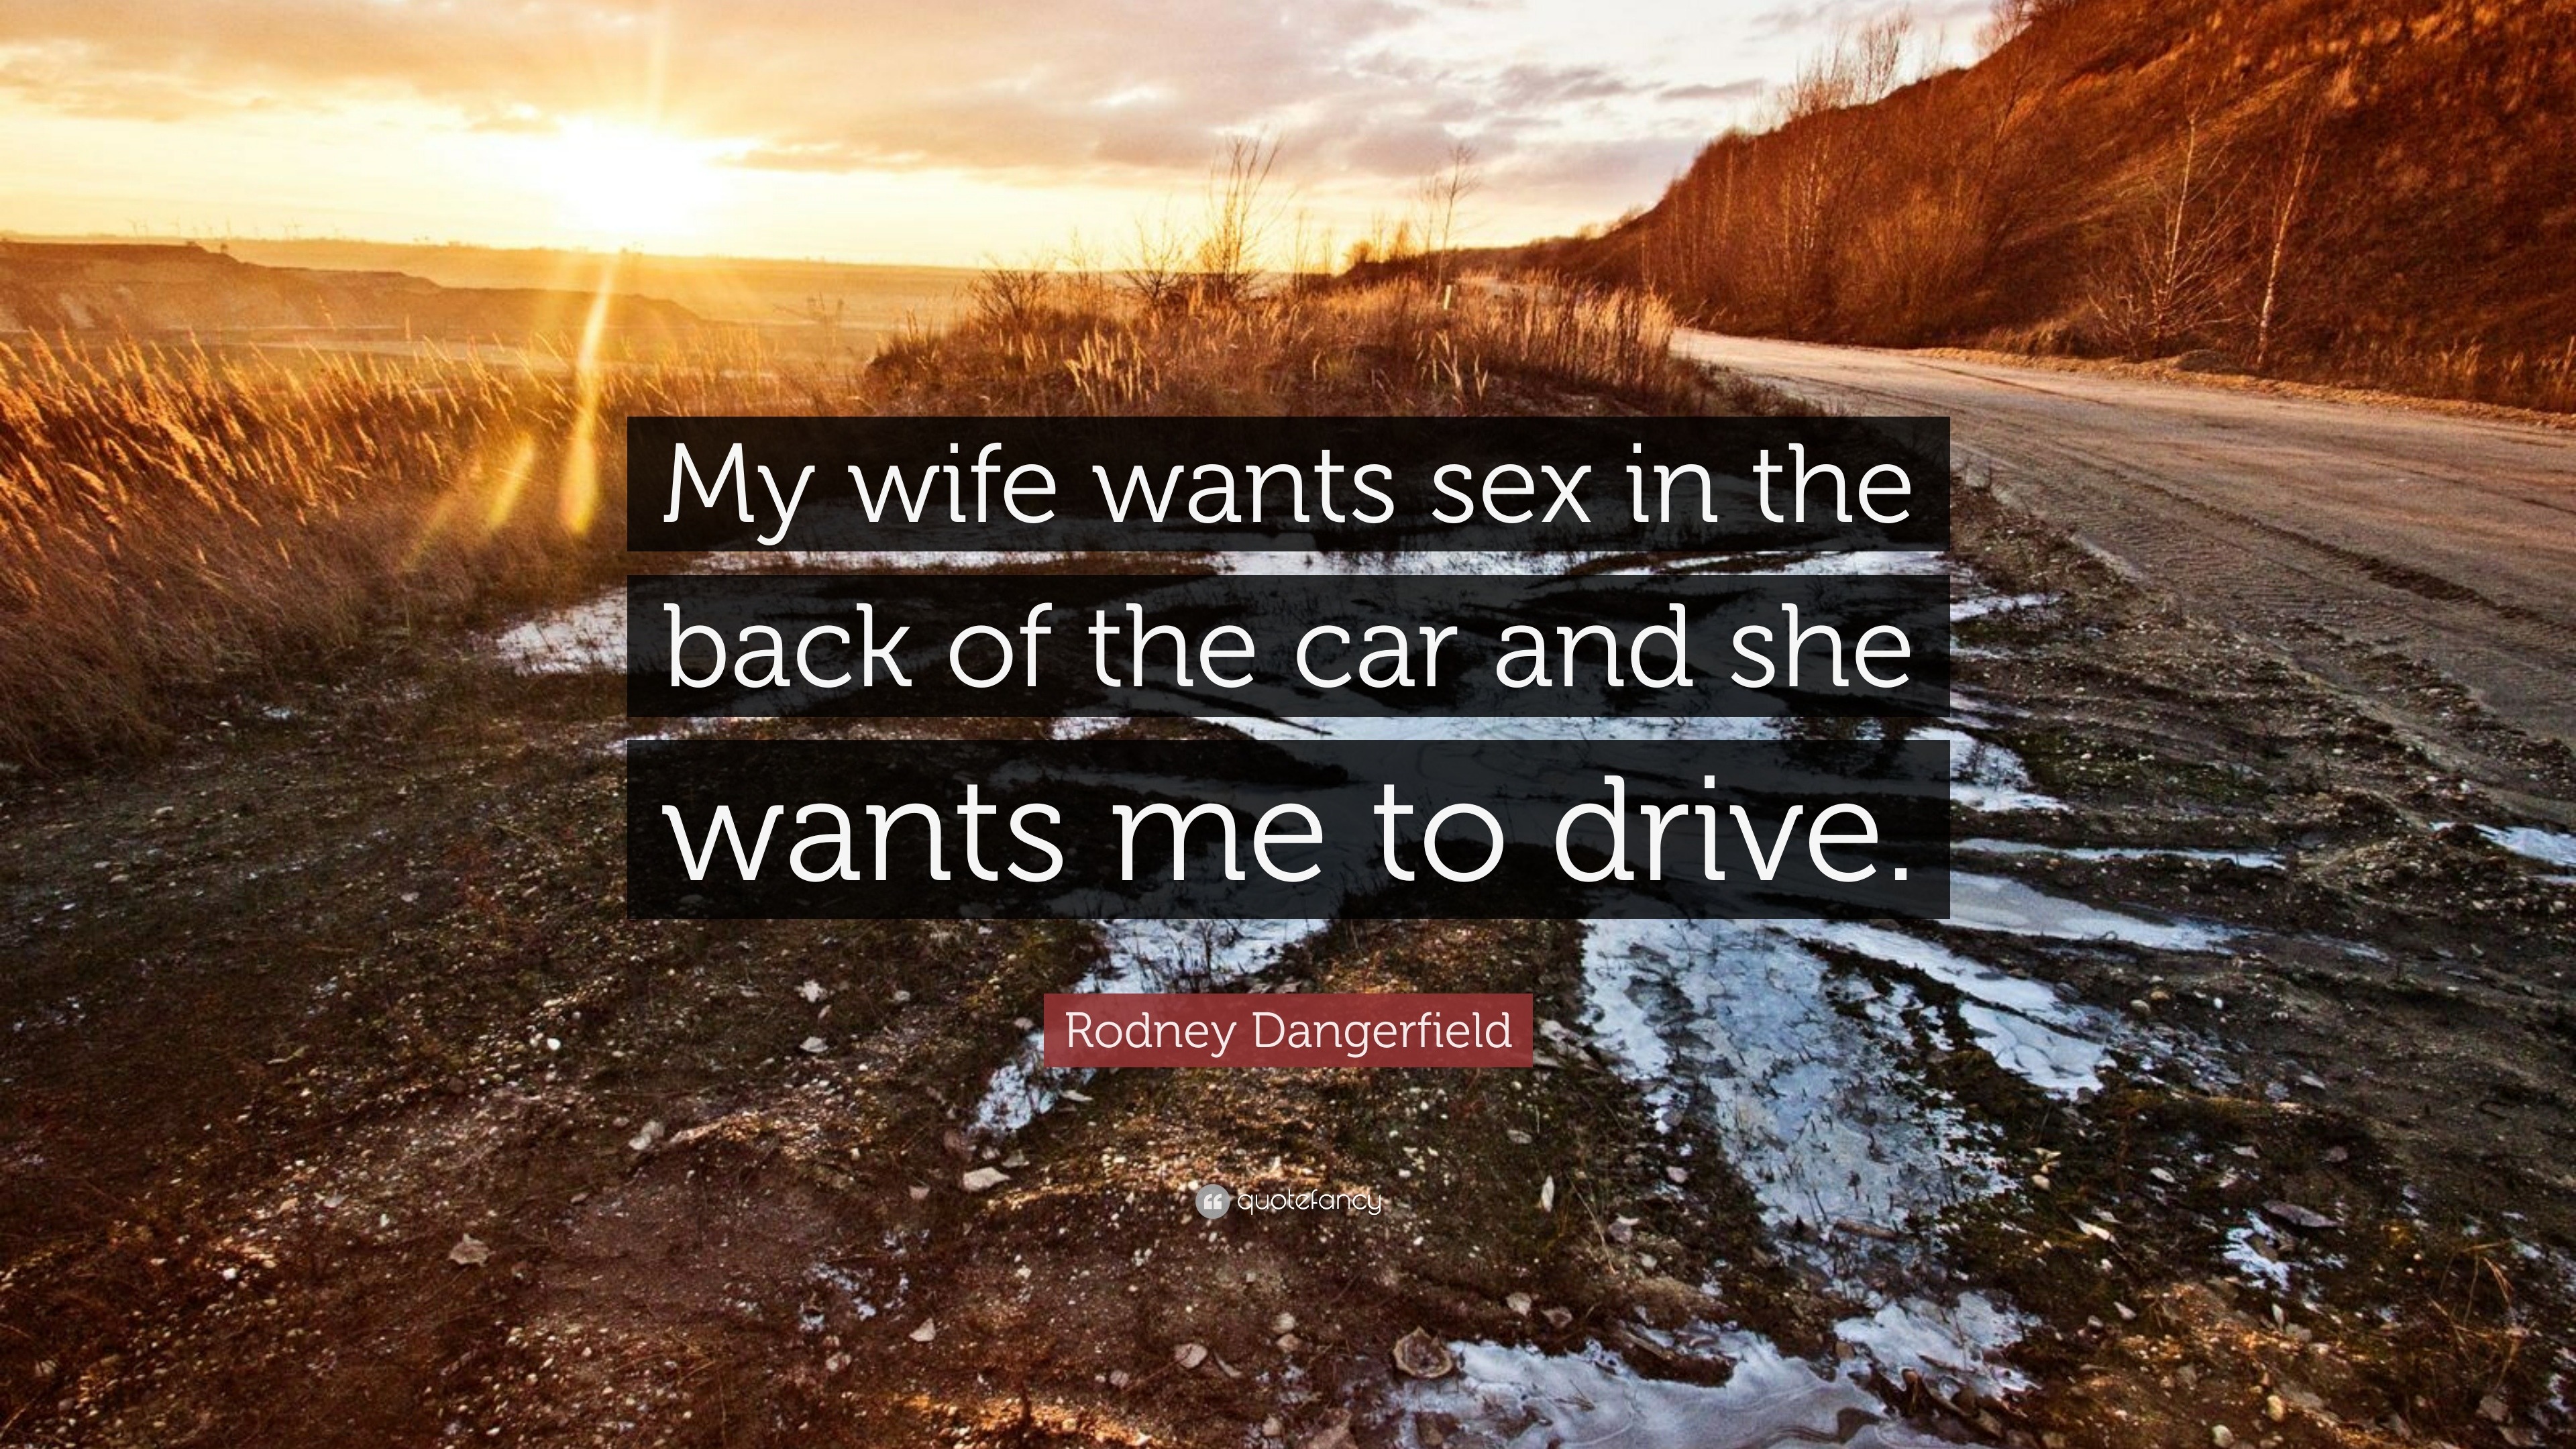 Rodney Dangerfield Quote “My wife wants sex in the back of the car and she wants photo